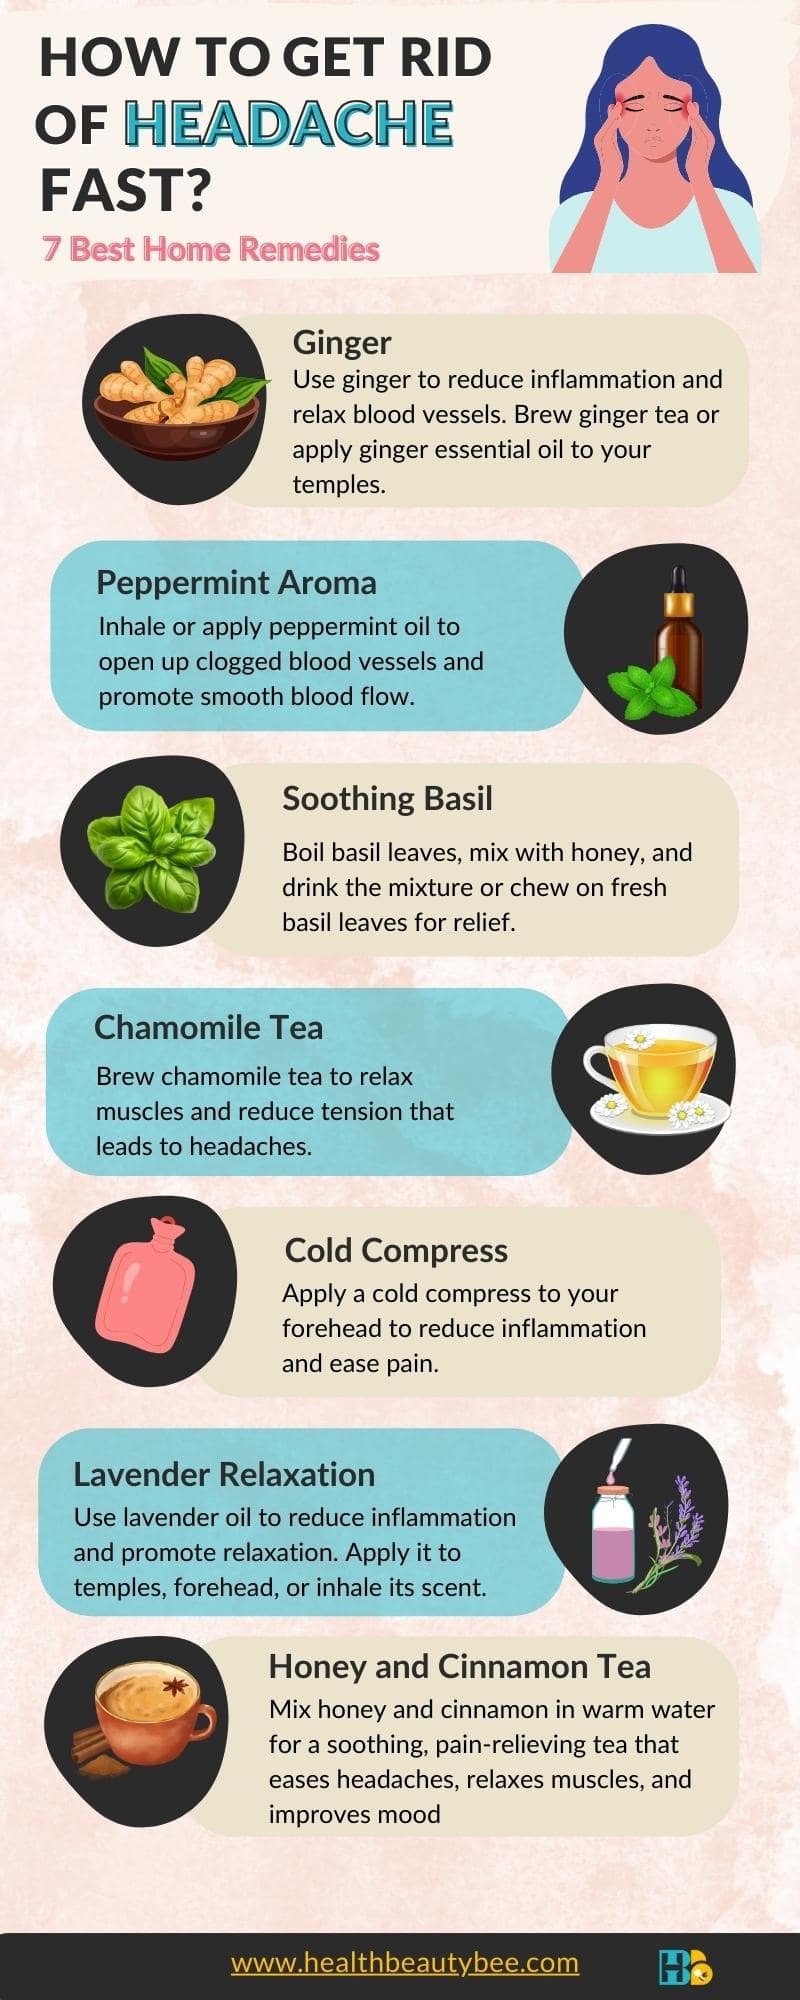 How to Get Rid of Headache with Home Remedies infographic healthbeautybee